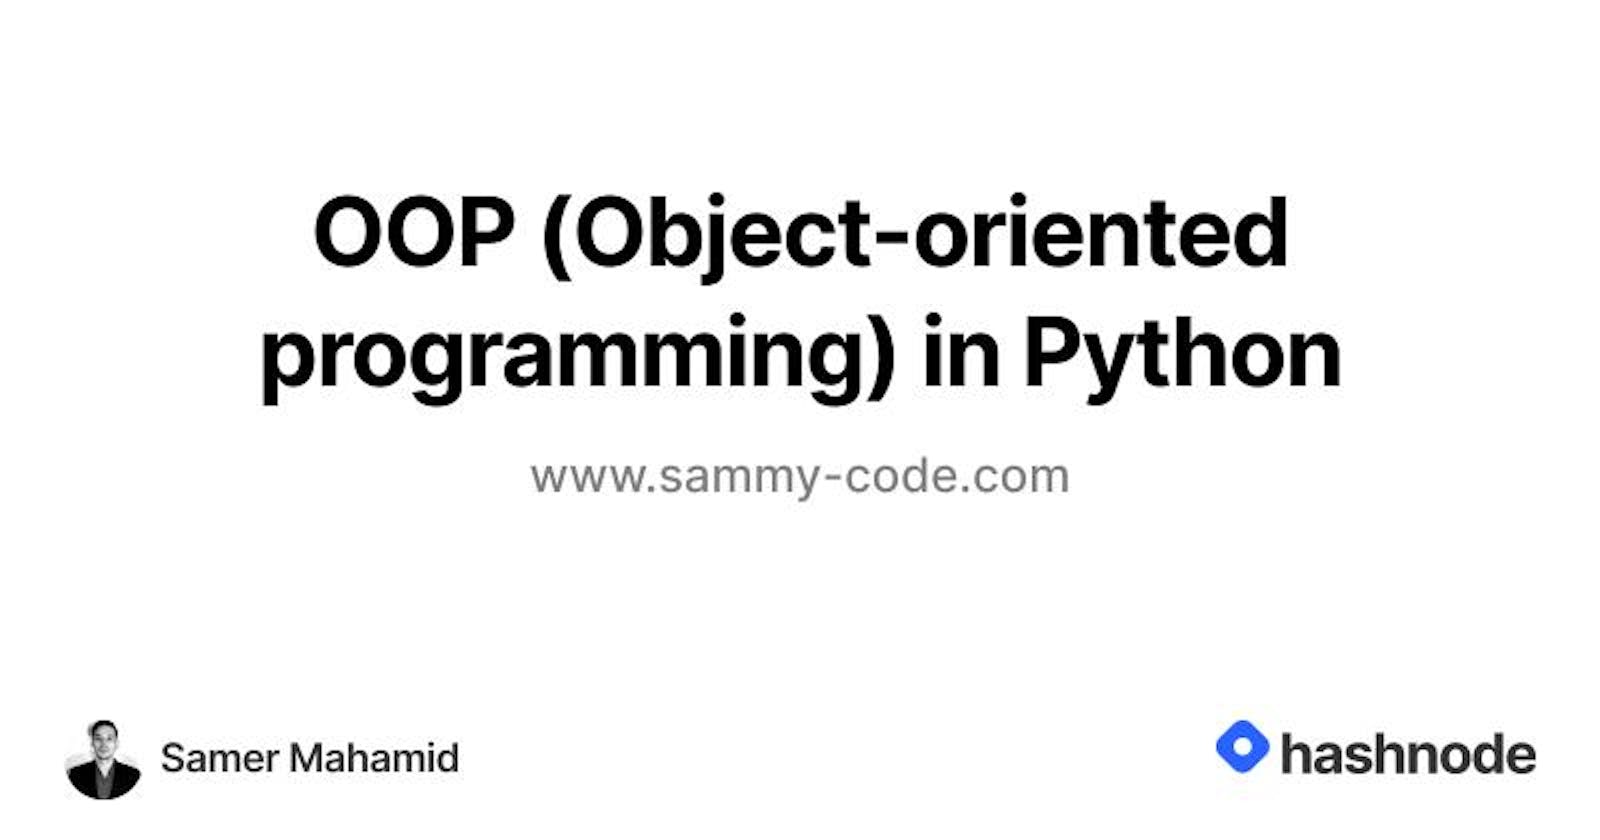 OOP (Object-oriented programming) in Python